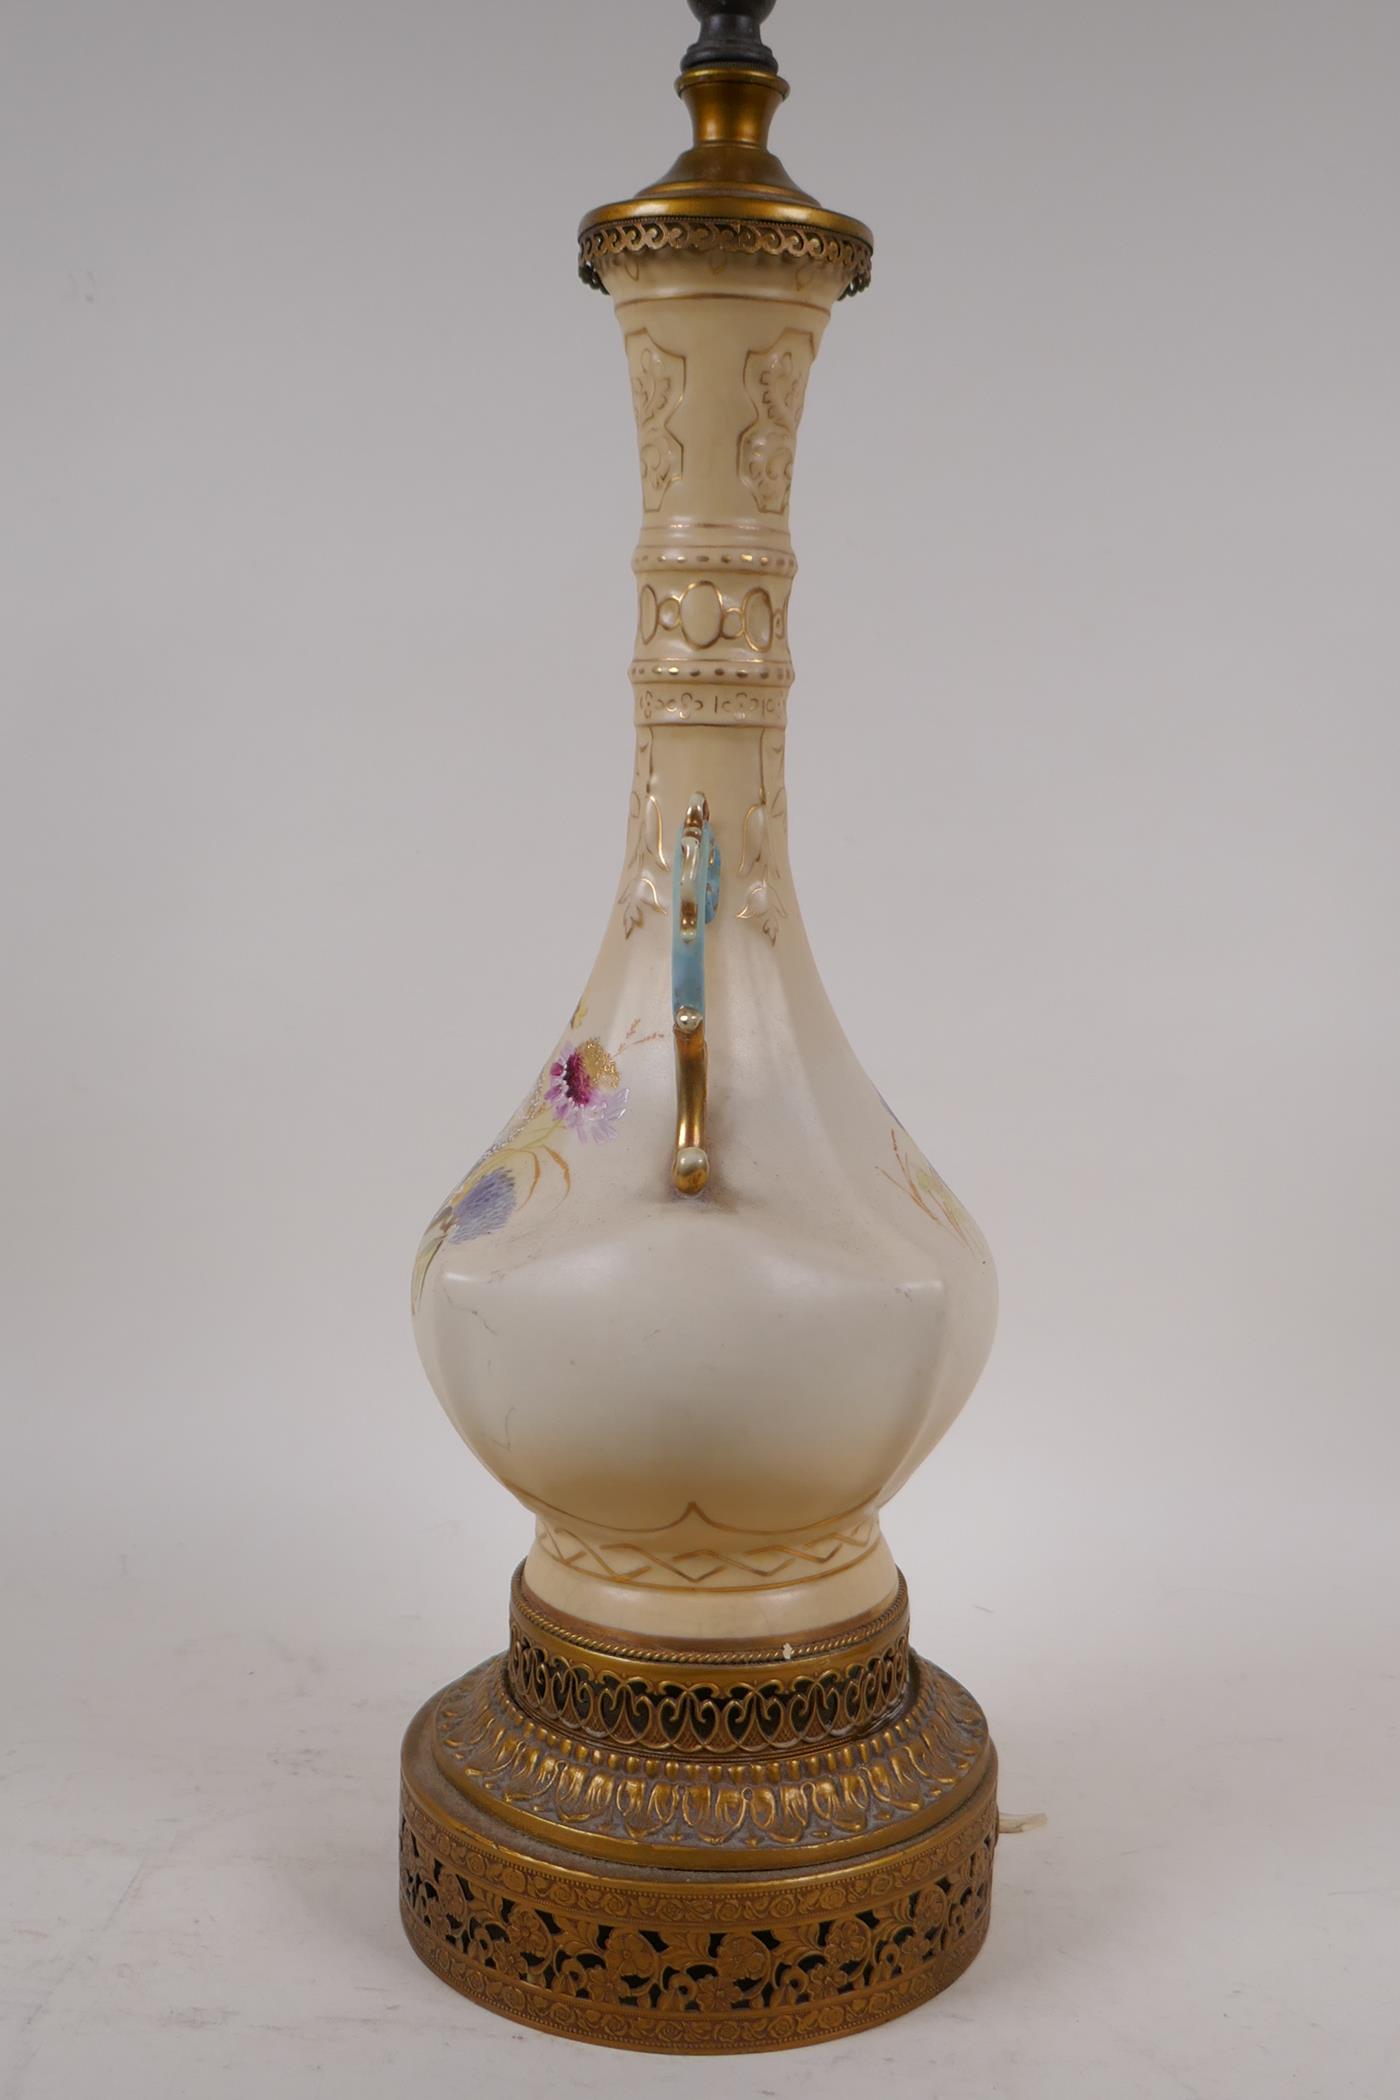 A C19th Worcester style two handled vase, converted to a lamp, with pierced brass base and mounts, - Image 3 of 5